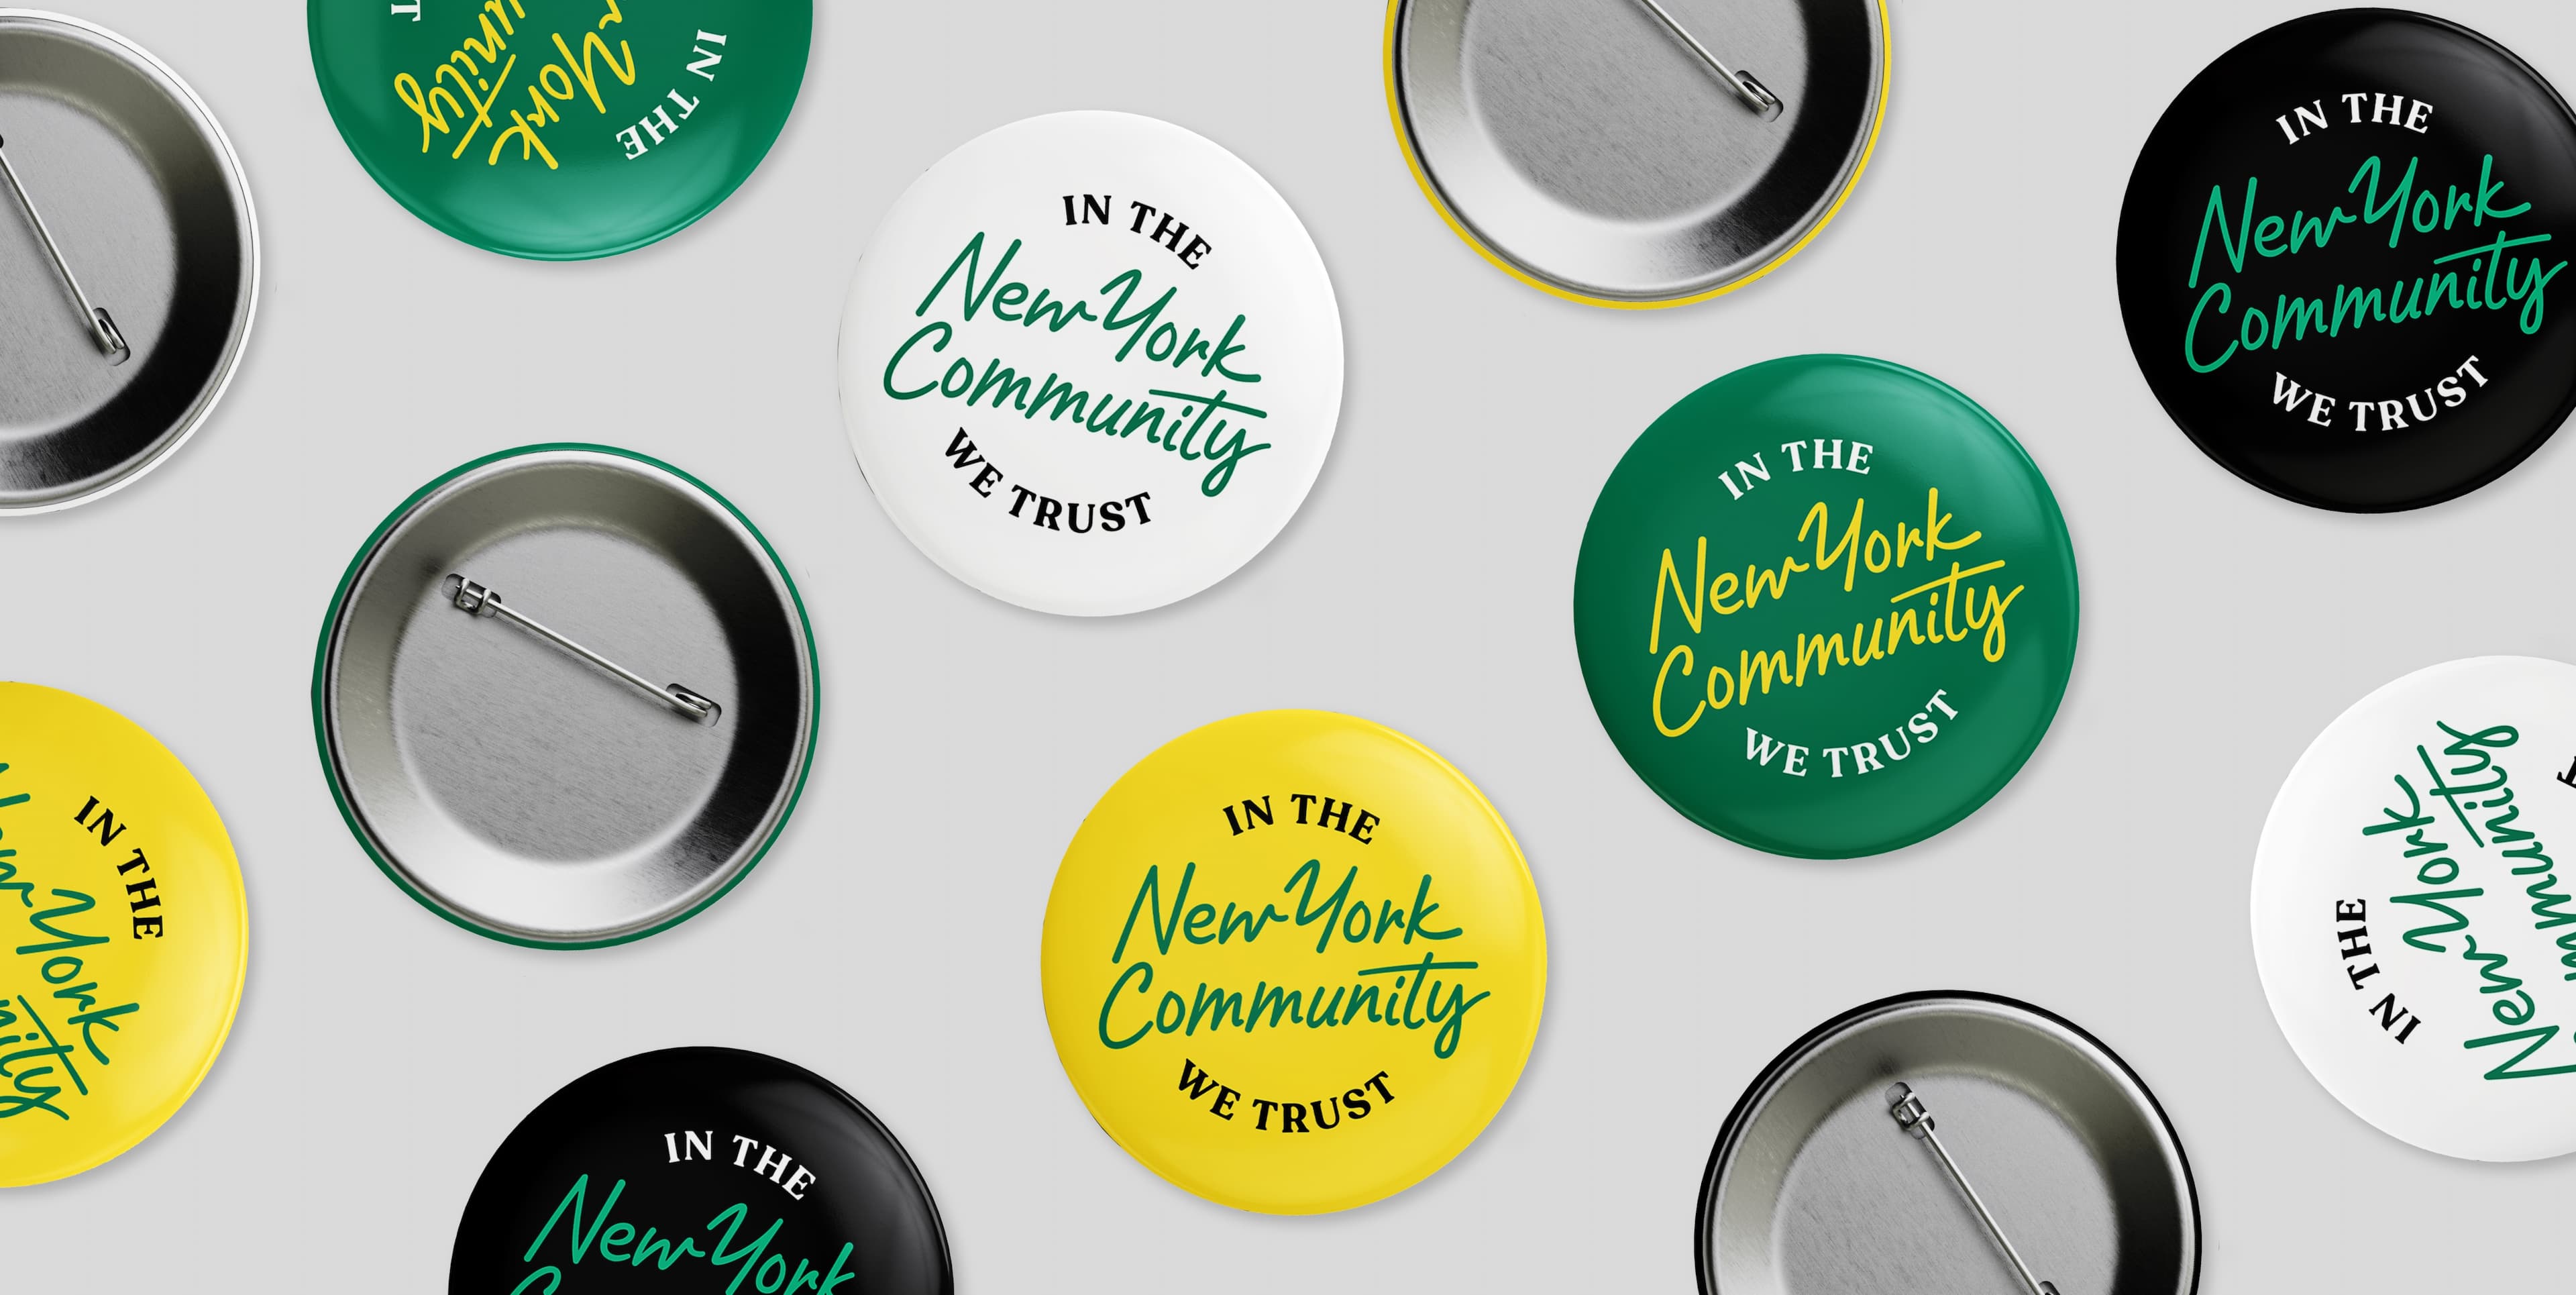 Several circular pins are spread out on a light gray surface. The pins feature texts in different colors and fonts, stating "IN THE New York Community WE TRUST." The pins come in various colors, including yellow, black, green, and white.